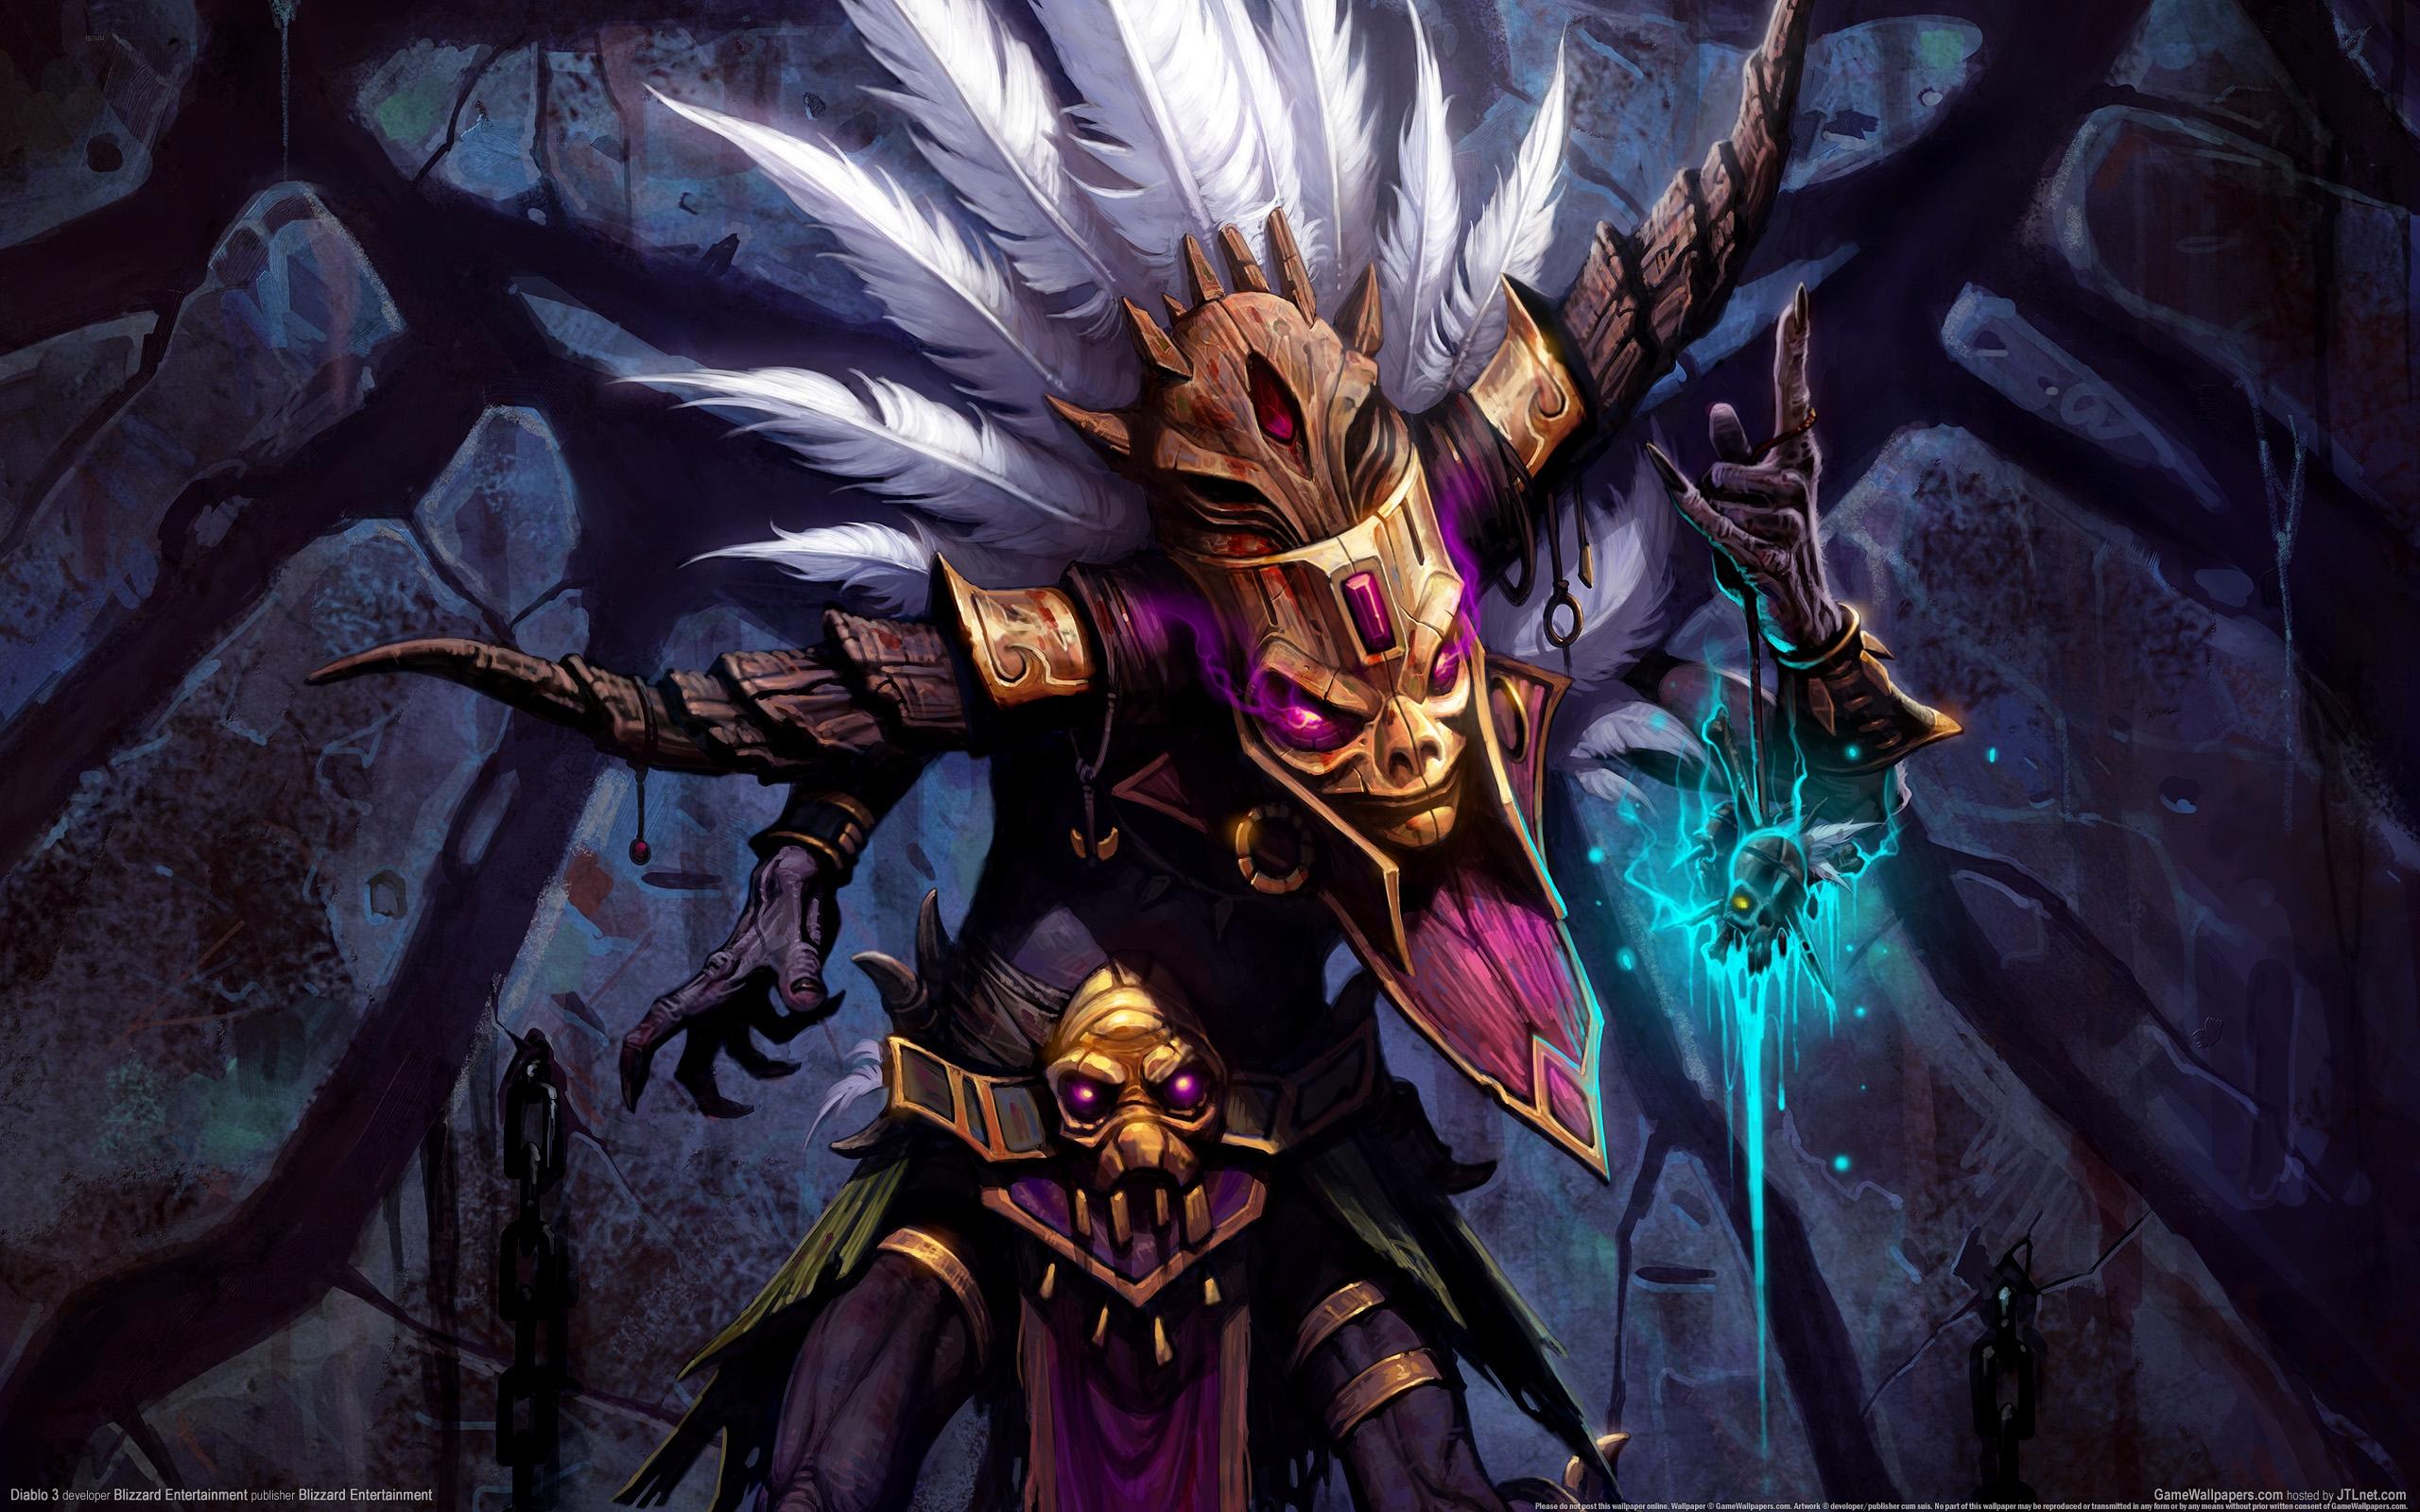 Dark and sinister Witch Doctor character from the video game Diablo III.